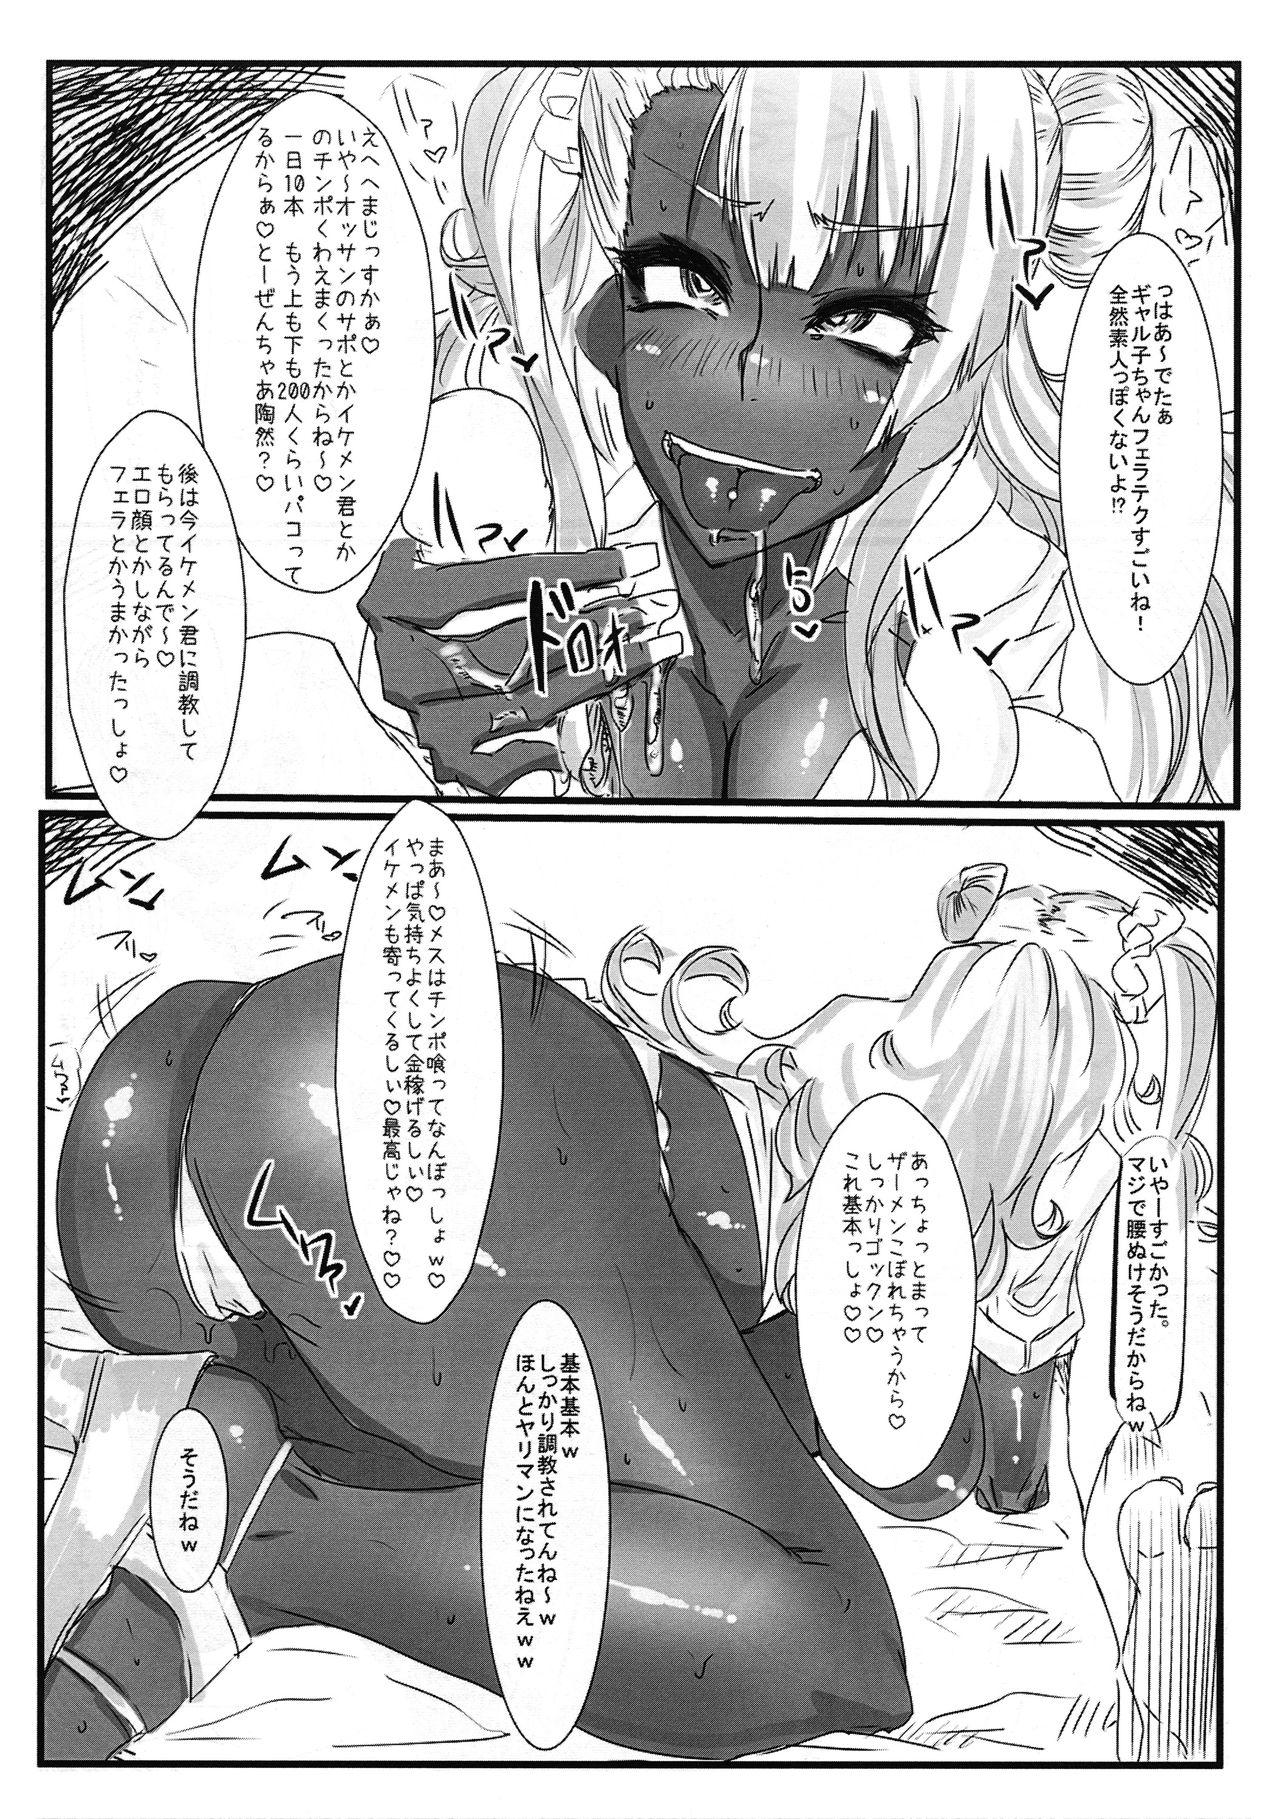 Scissoring PROSTITUTE² +VER3.0 - Oshiete galko-chan Small Boobs - Page 6